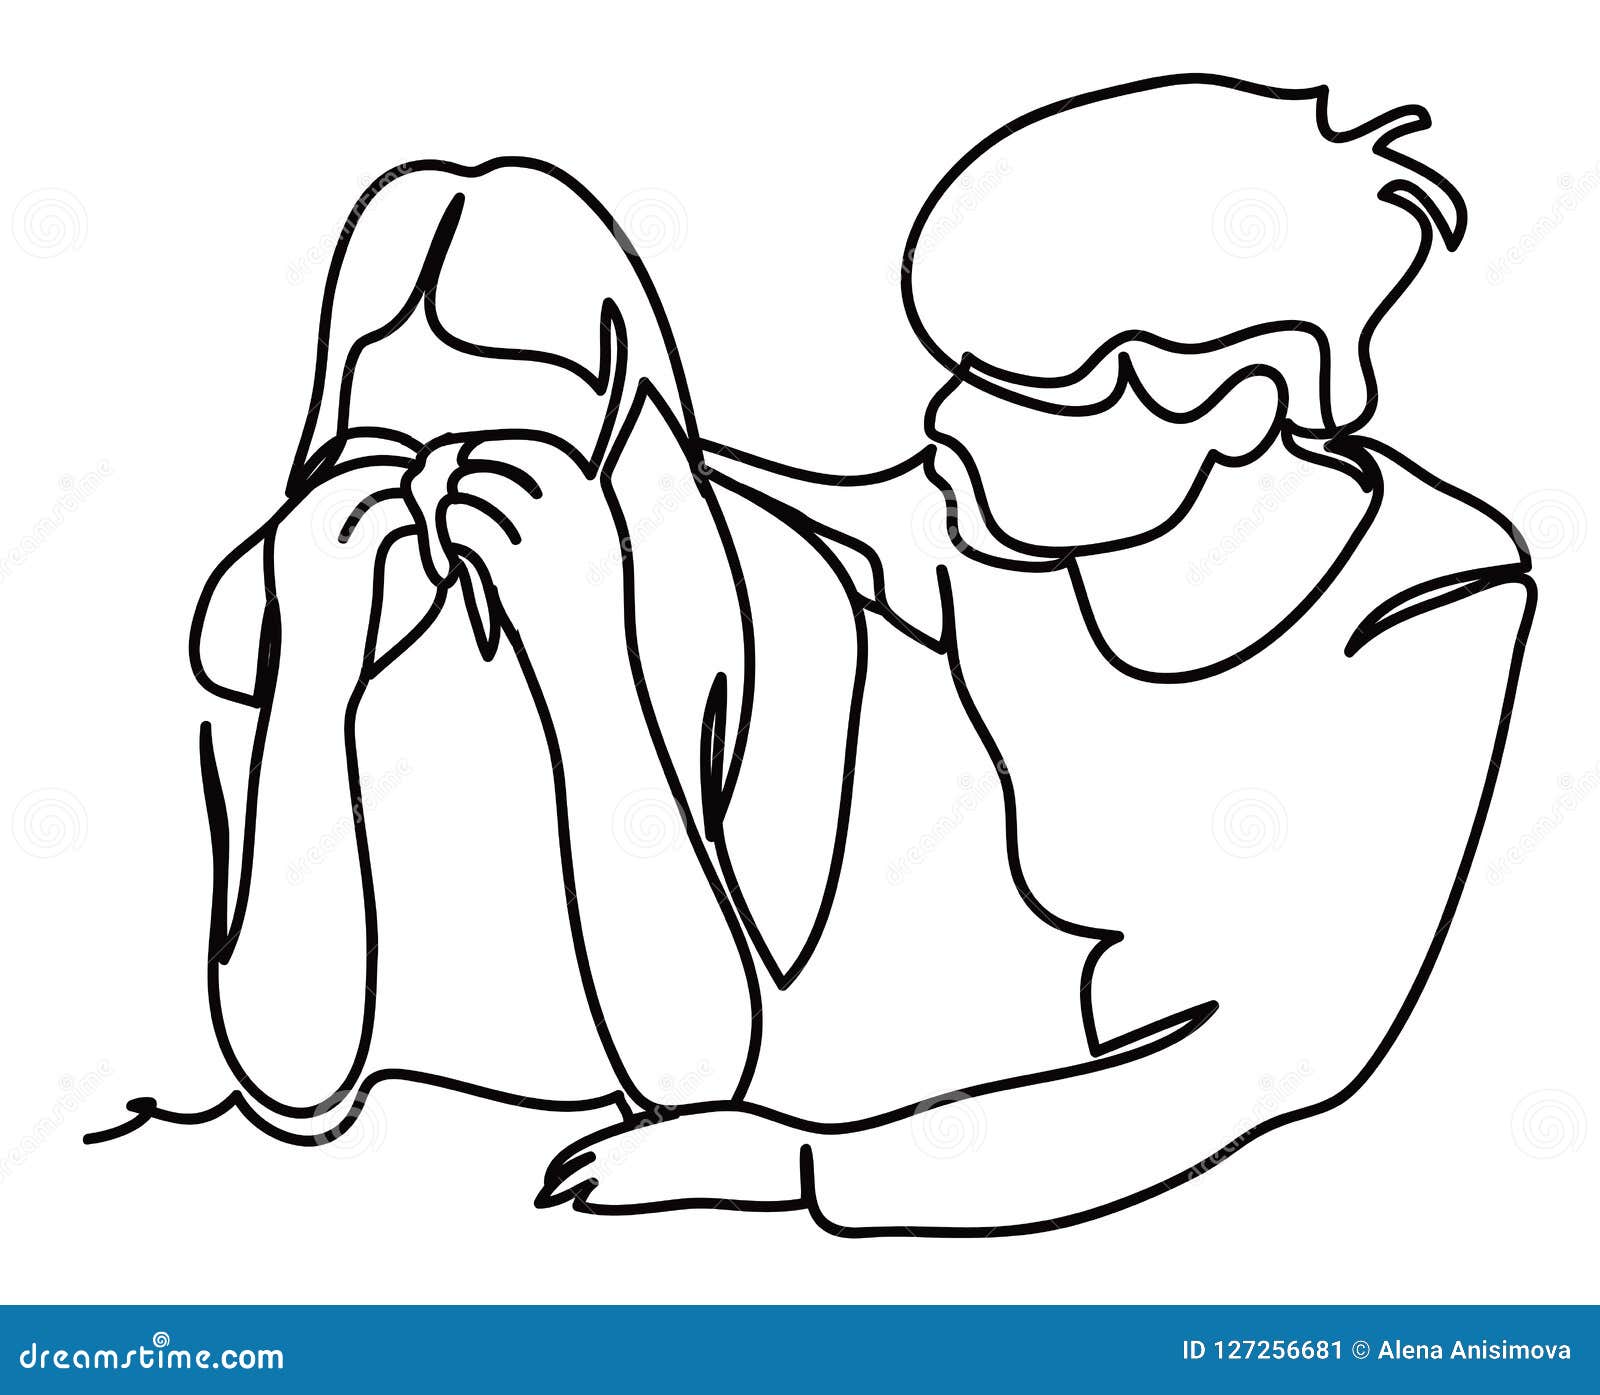 girl trying to comfort encourage her sad best friend stressing continuous line drawing vector isolated illustration 127256681